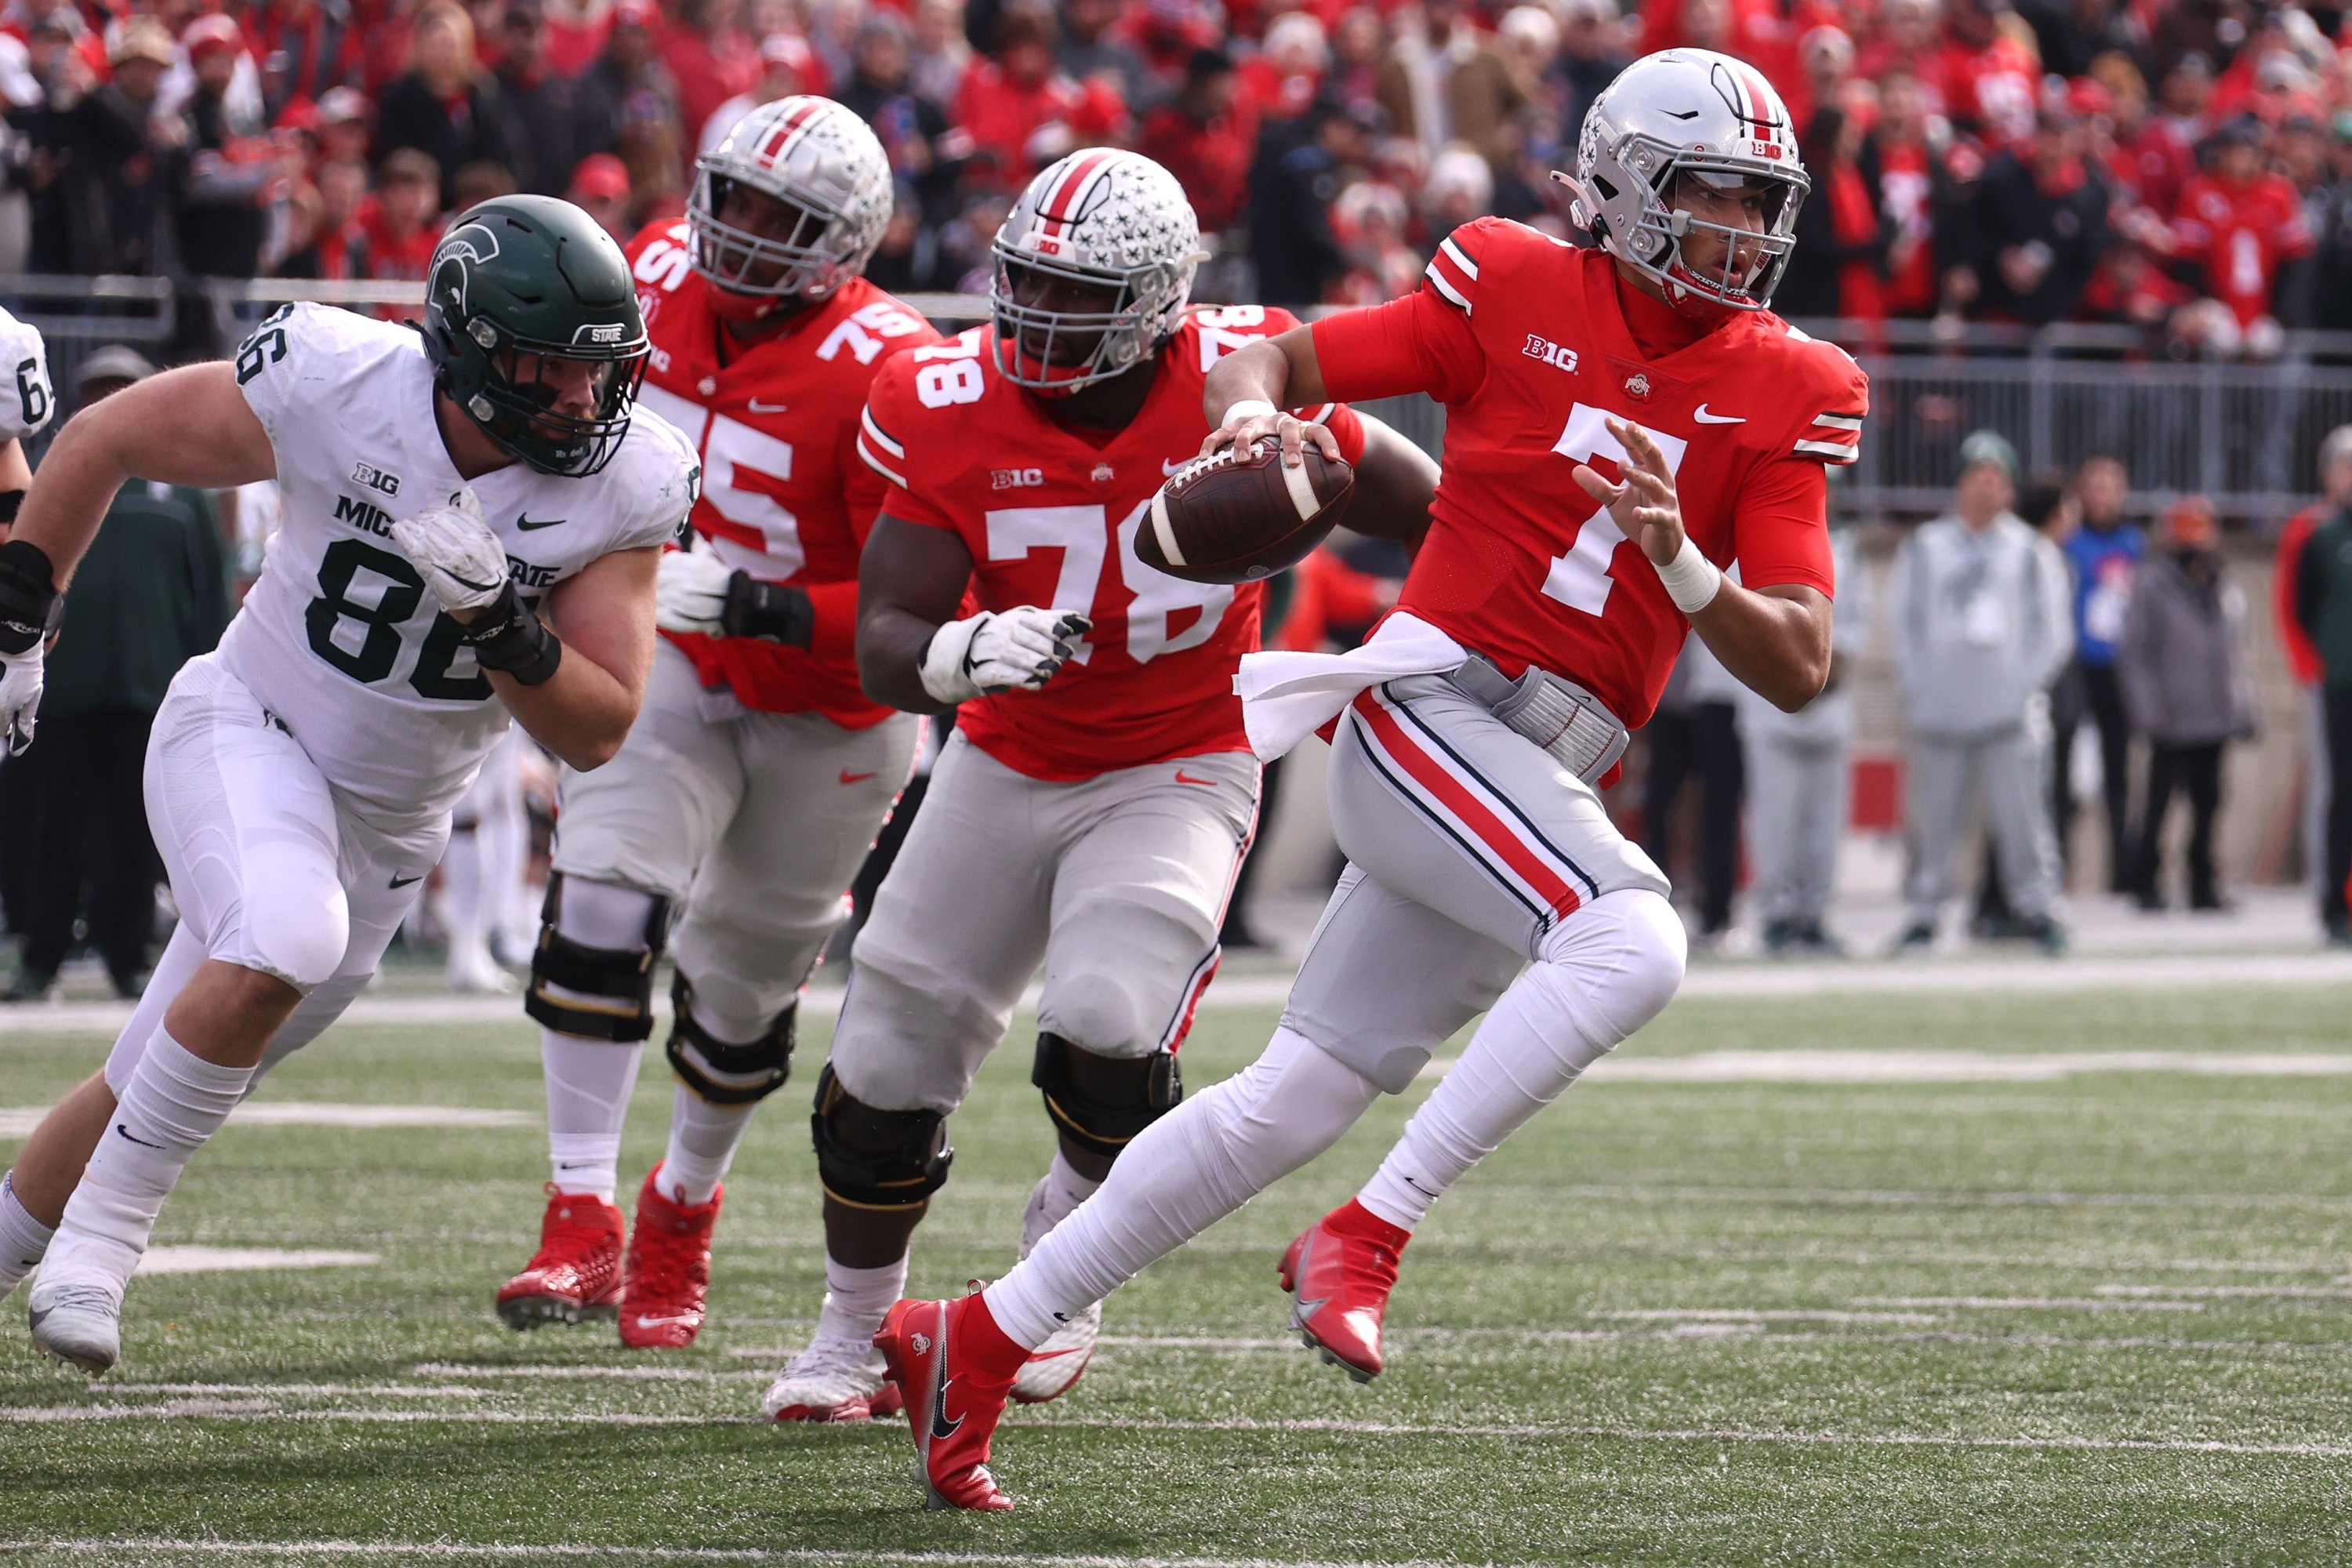 C.J. Stroud (7) of the Ohio State Buckeyes looks to make a pass while playing the Michigan State Spartans at Ohio Stadium, Columbus, Ohio, U.S., Nov. 20, 2021. (AFP Photo)